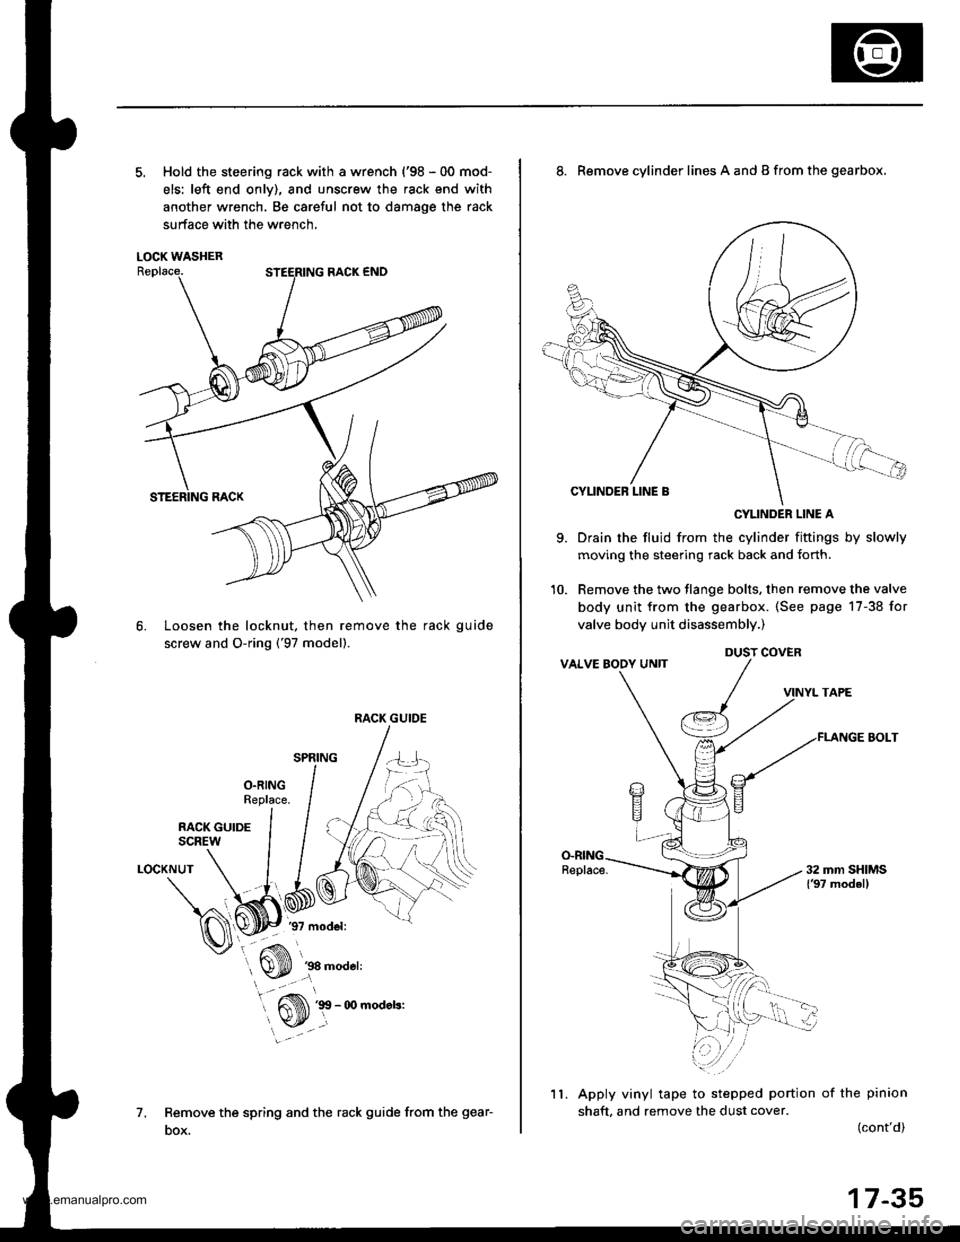 HONDA CR-V 1998 RD1-RD3 / 1.G User Guide 
5. Hold the steering rack with a wrench {98 - 00 mod-
els: left end onlv), and unscrew the rack end with
another wrench, Be careful not to damage the rack
surface with the wrench,
LOCK WASHER
Loosen